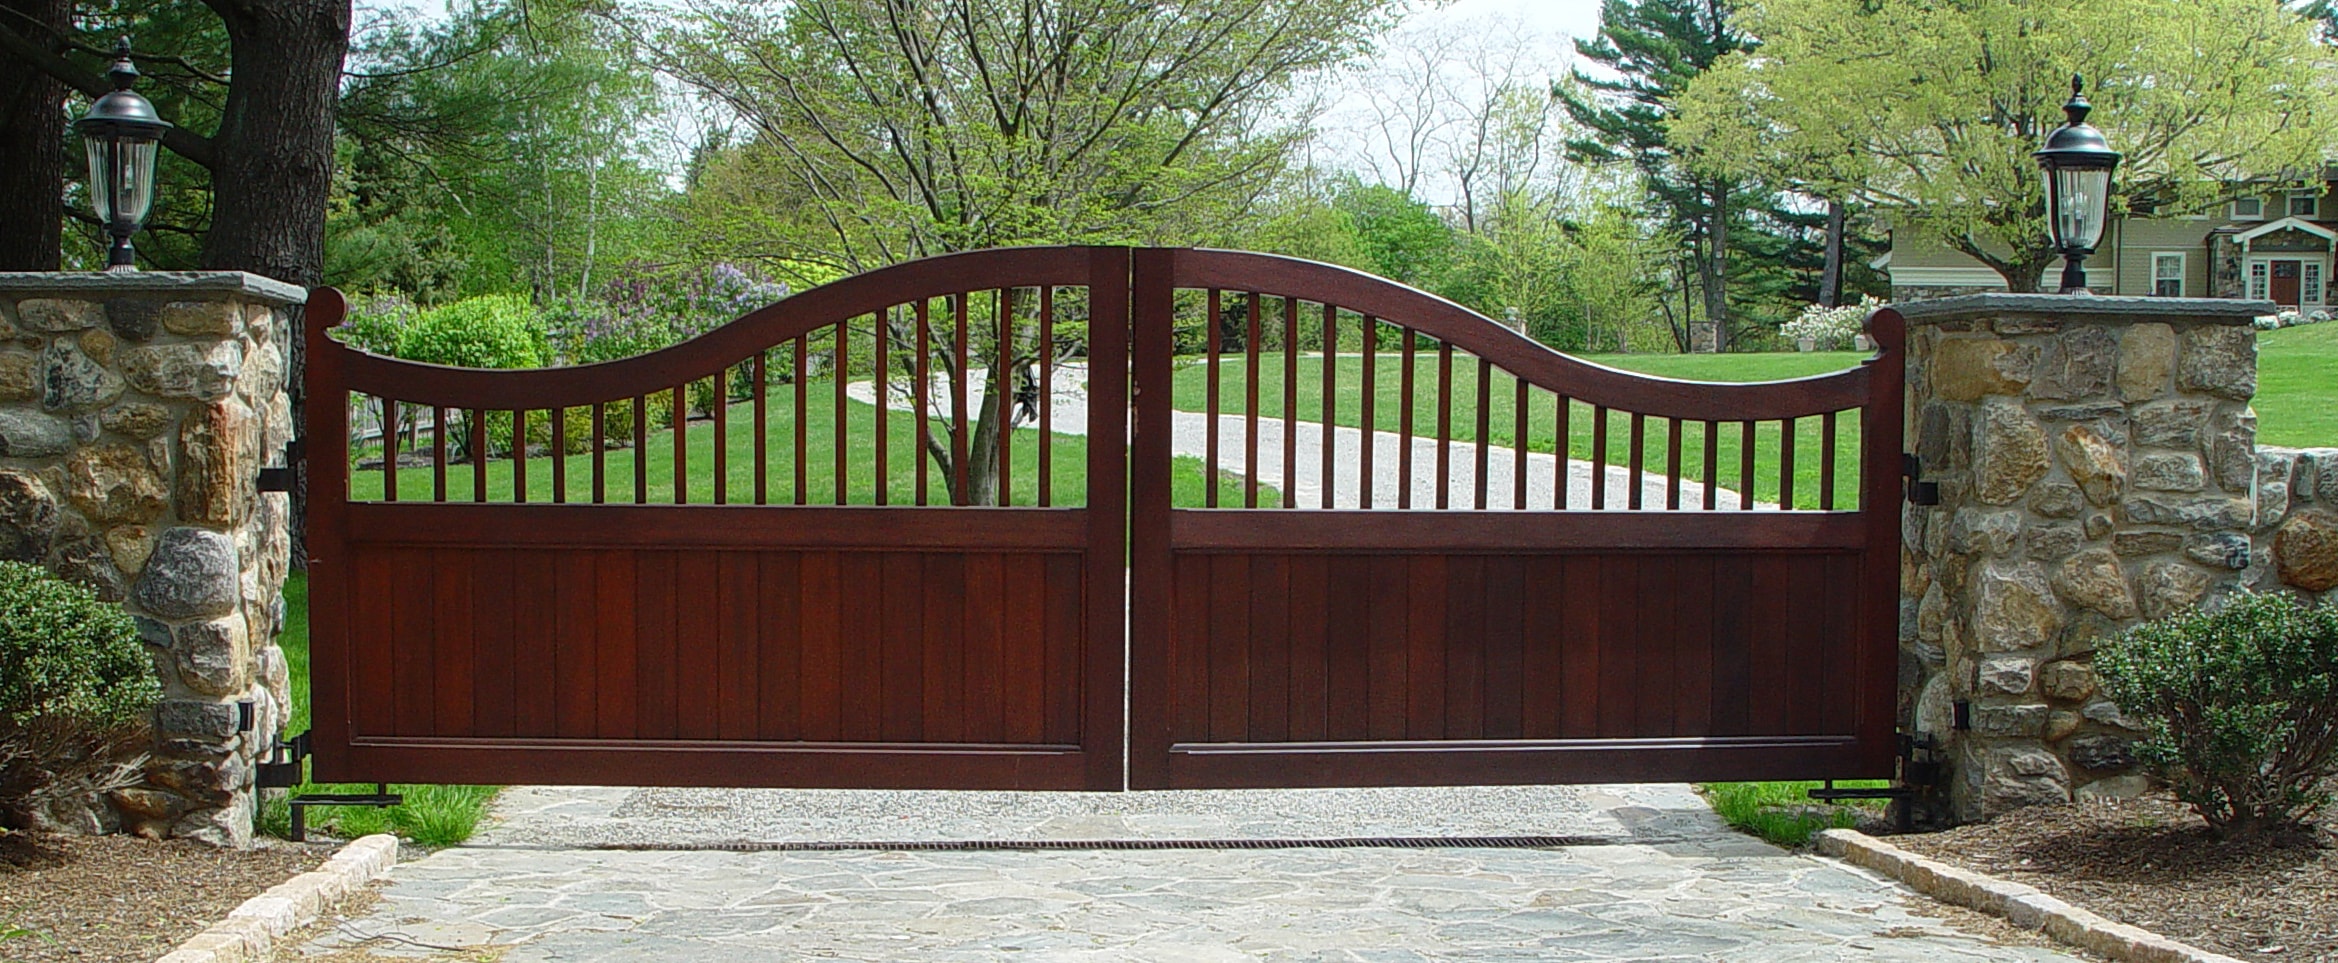 Automated Driveway Gates in New York | Tri State Gate